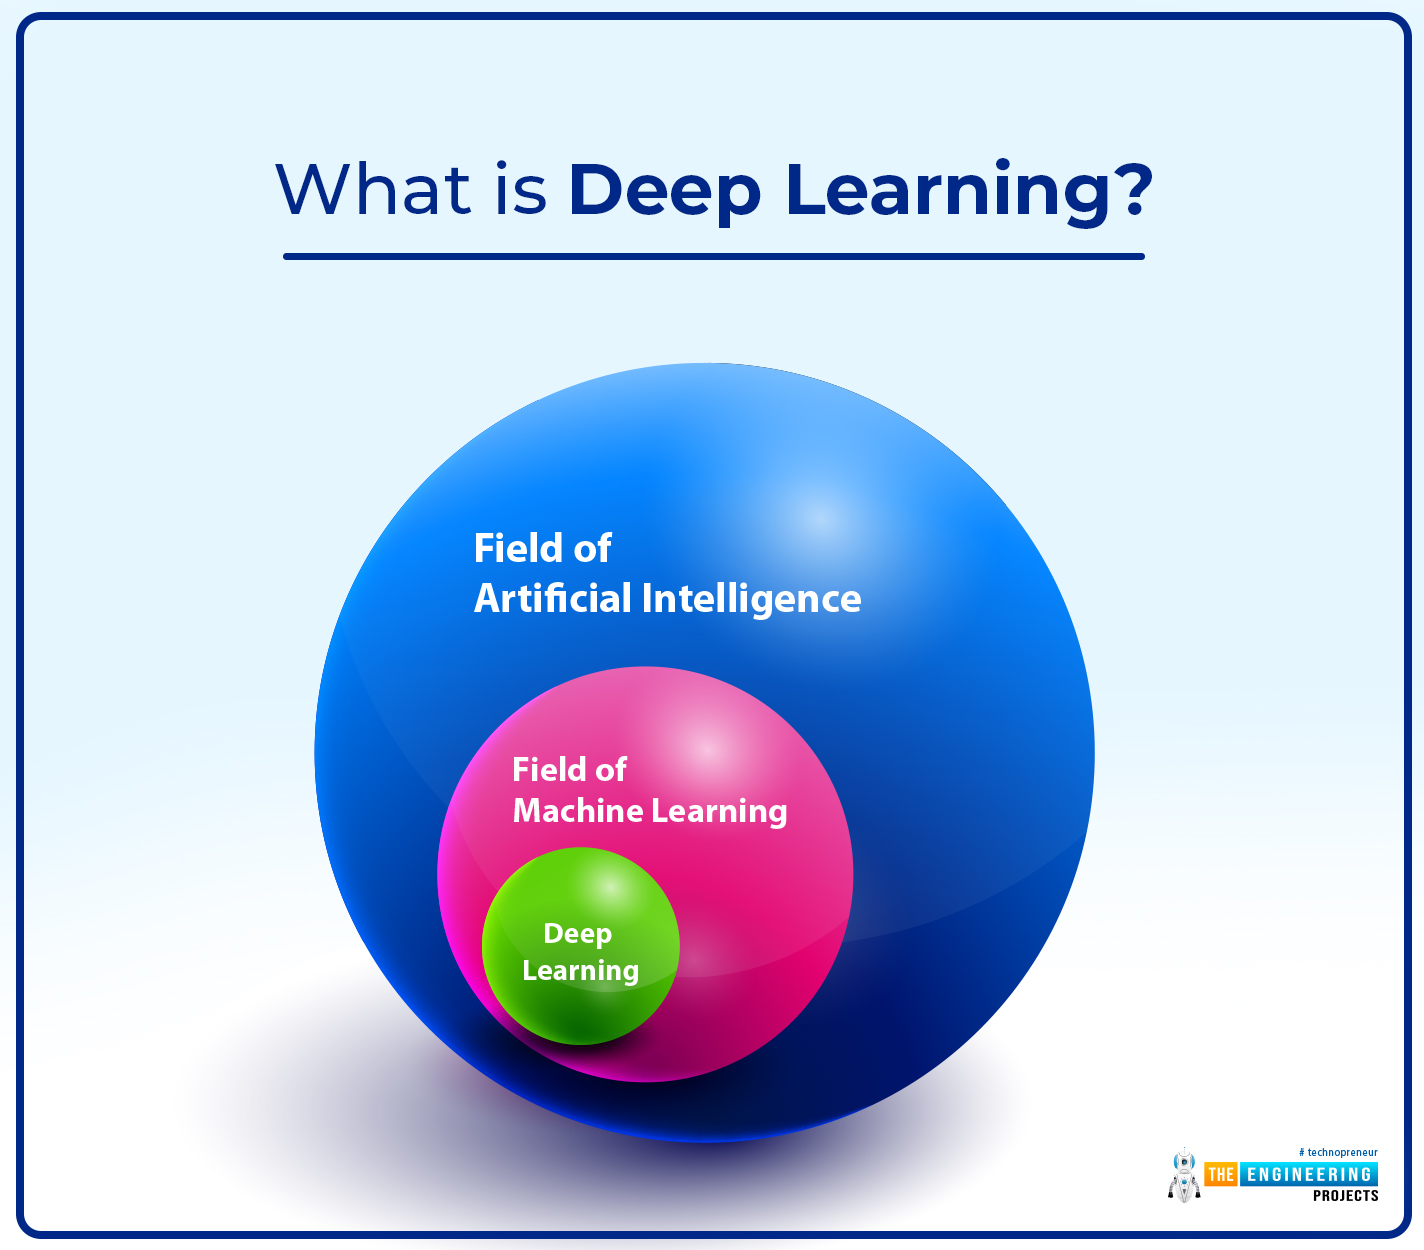 Deep Learning, working with deep learning, basics of deep learning, deep learning intro, getting started with deep learning, deep learning basics, careers in deep learning